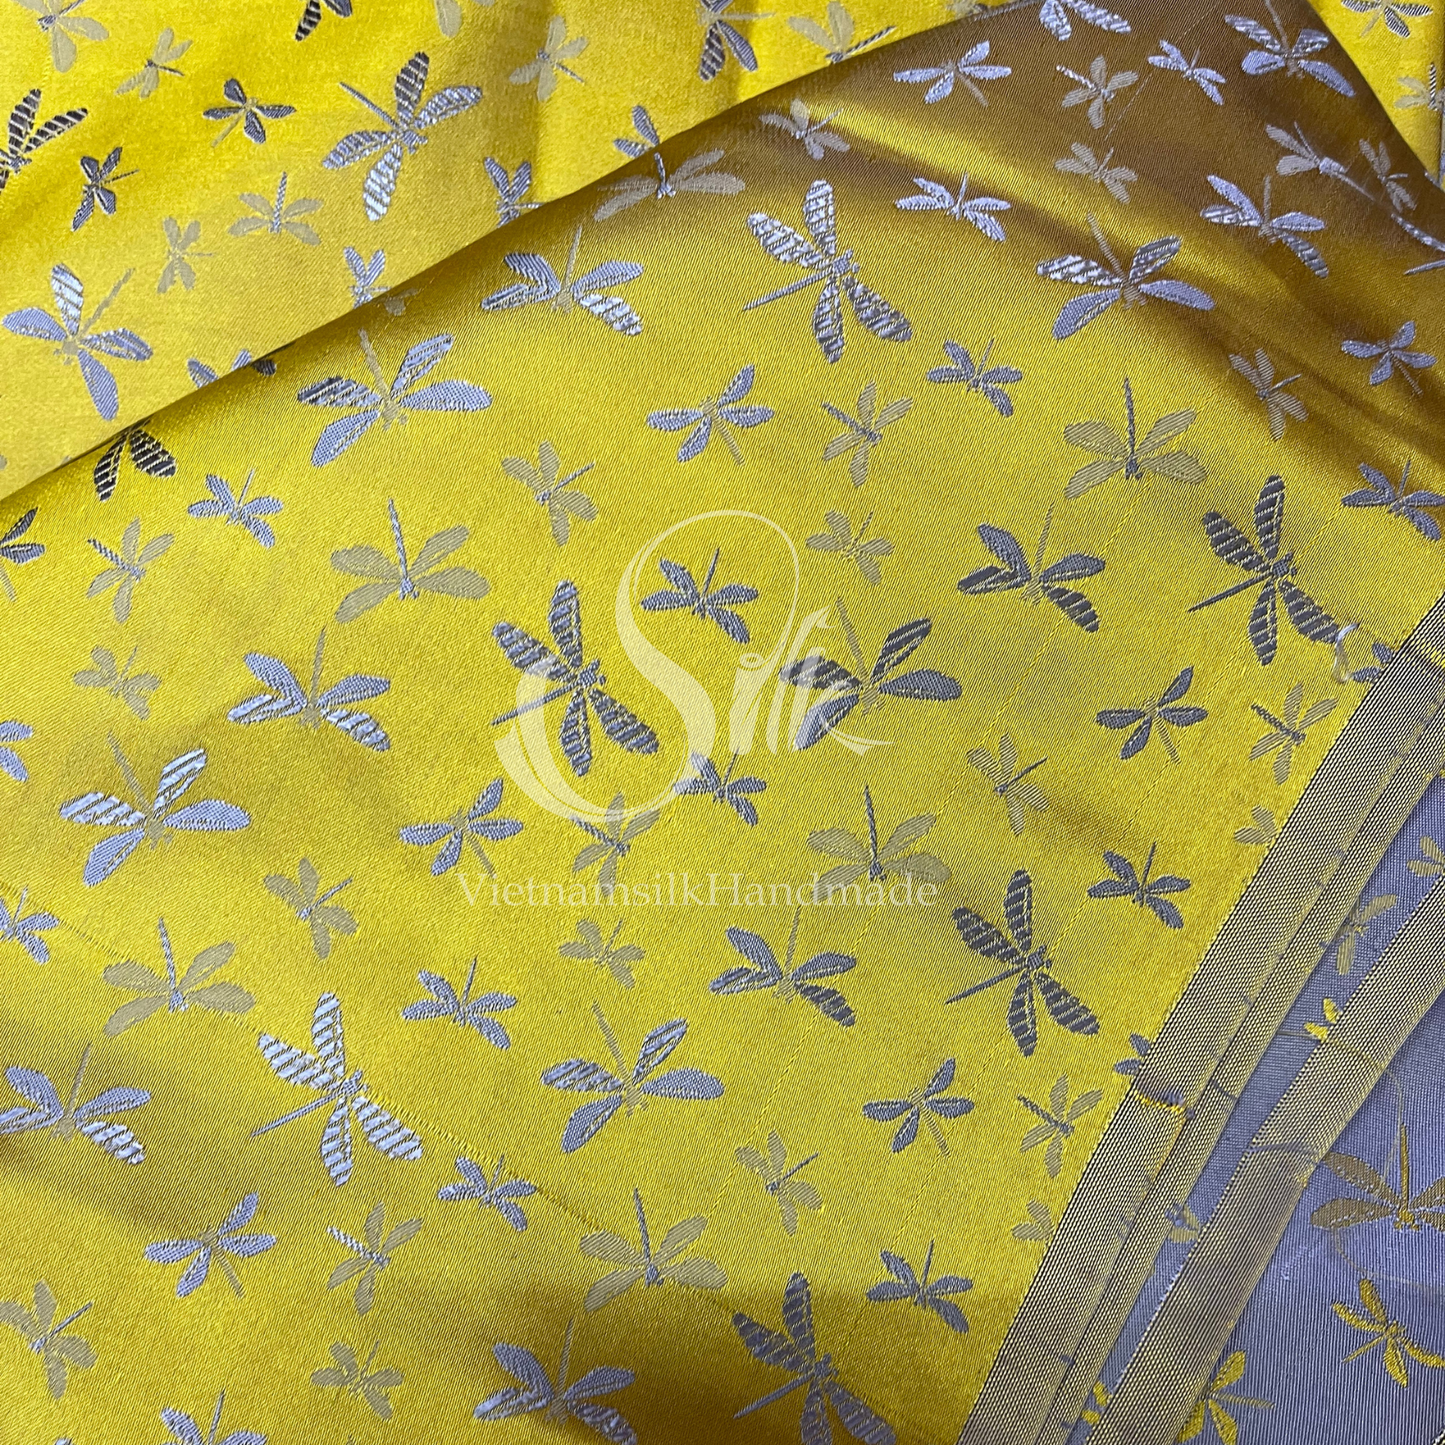 Yellow silk with Dragonfly patterns - PURE MULBERRY SILK fabric by the yard - Dragonfly silk -Luxury Silk - Natural silk - Handmade in VietNam